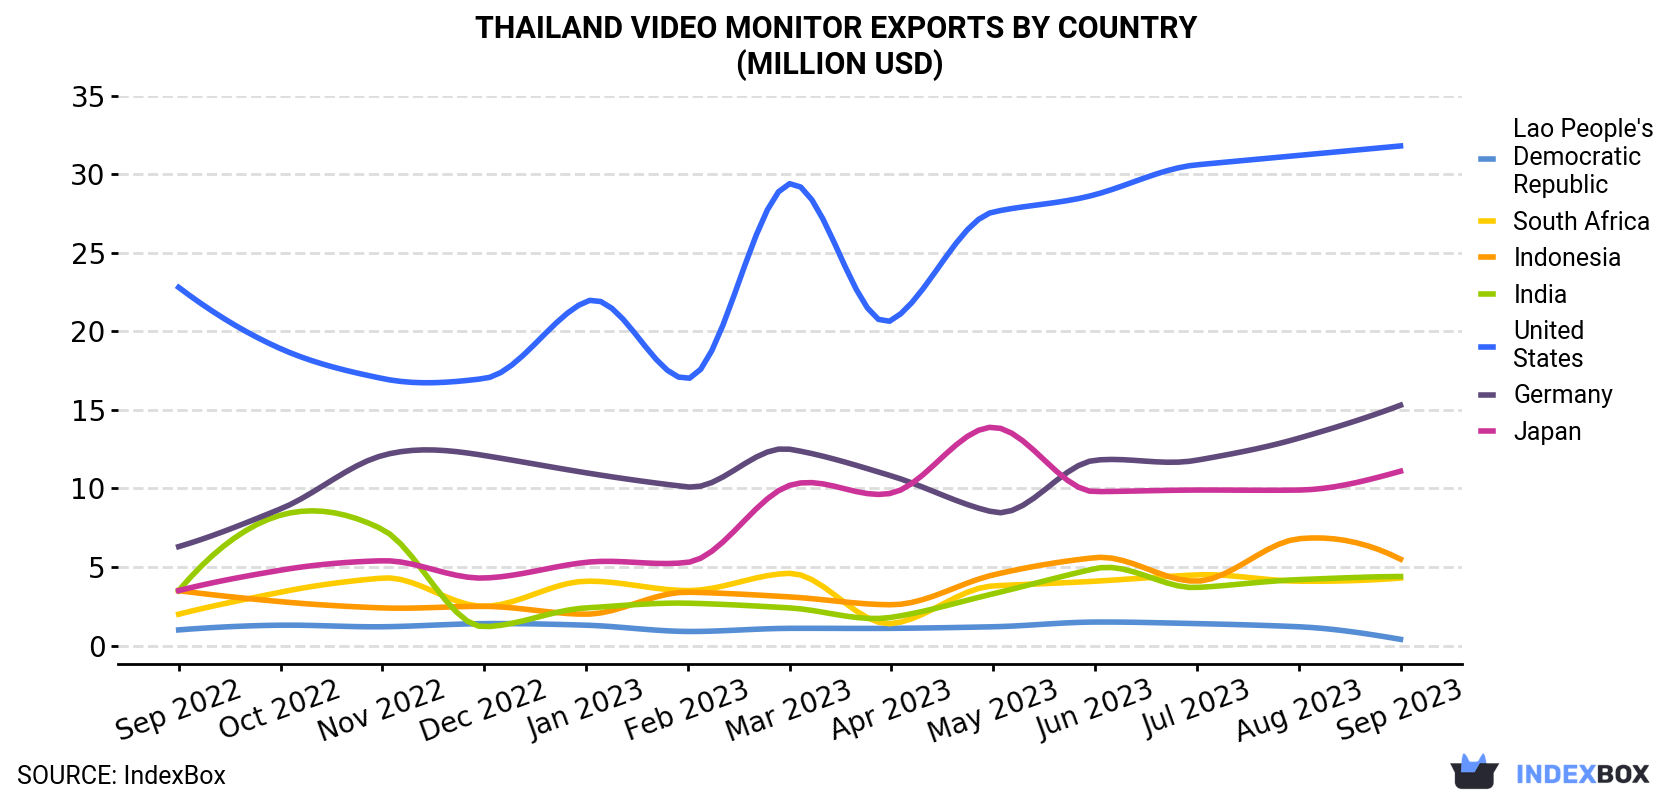 Thailand Video Monitor Exports By Country (Million USD)